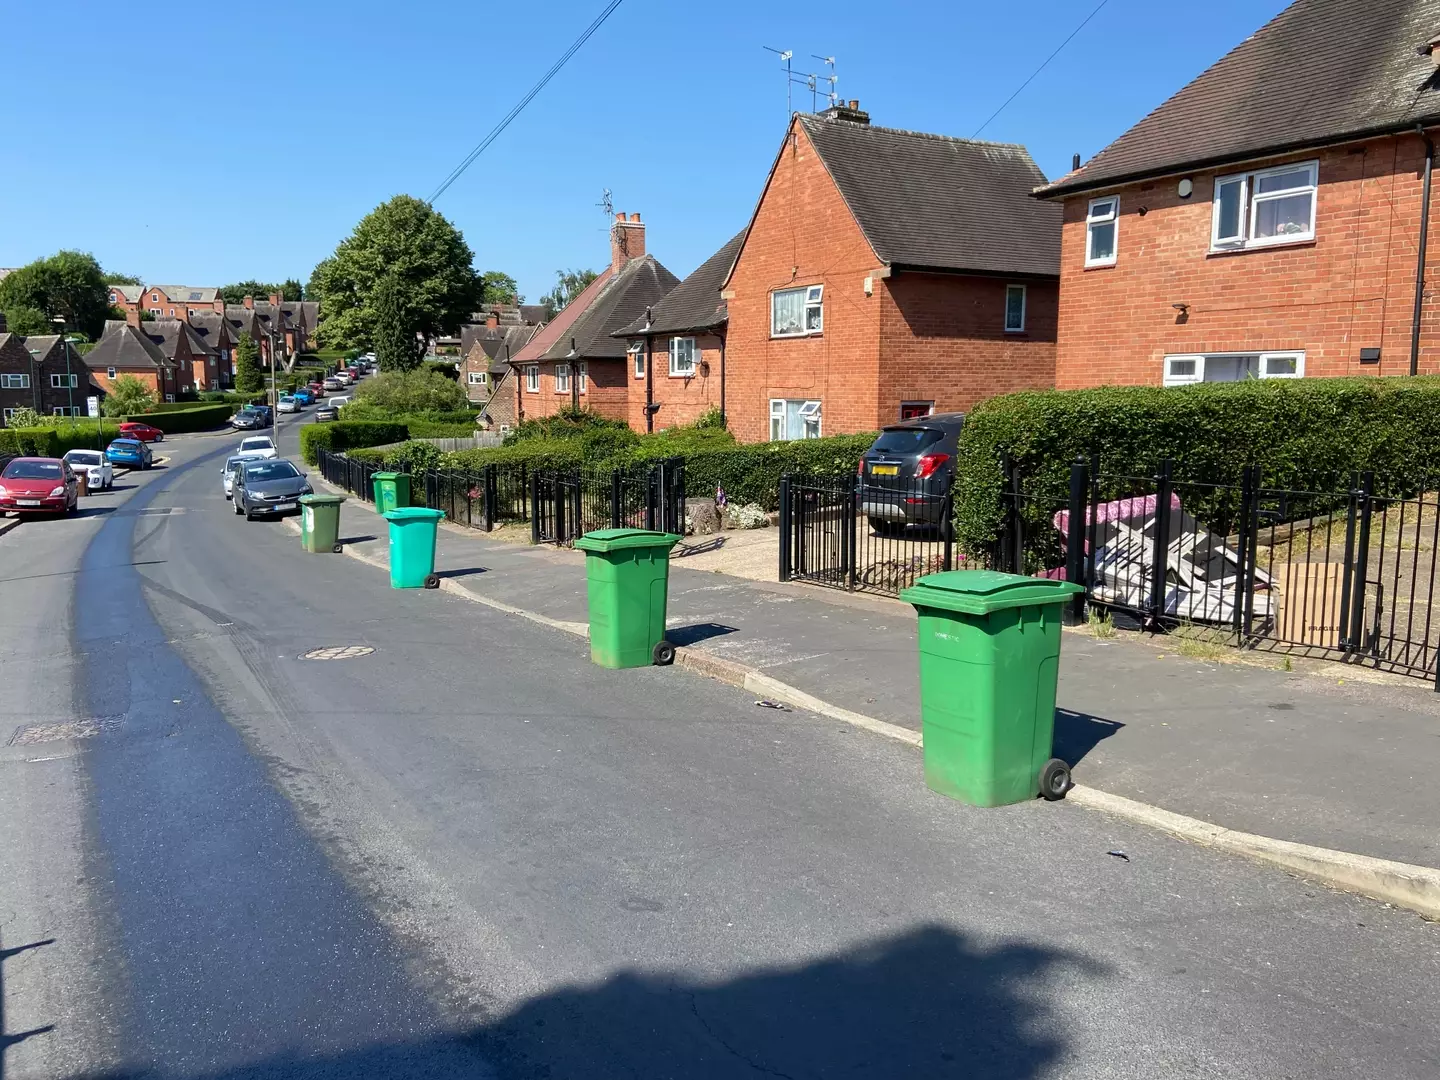 Residents are using wheelie bins to prevent people from parking.